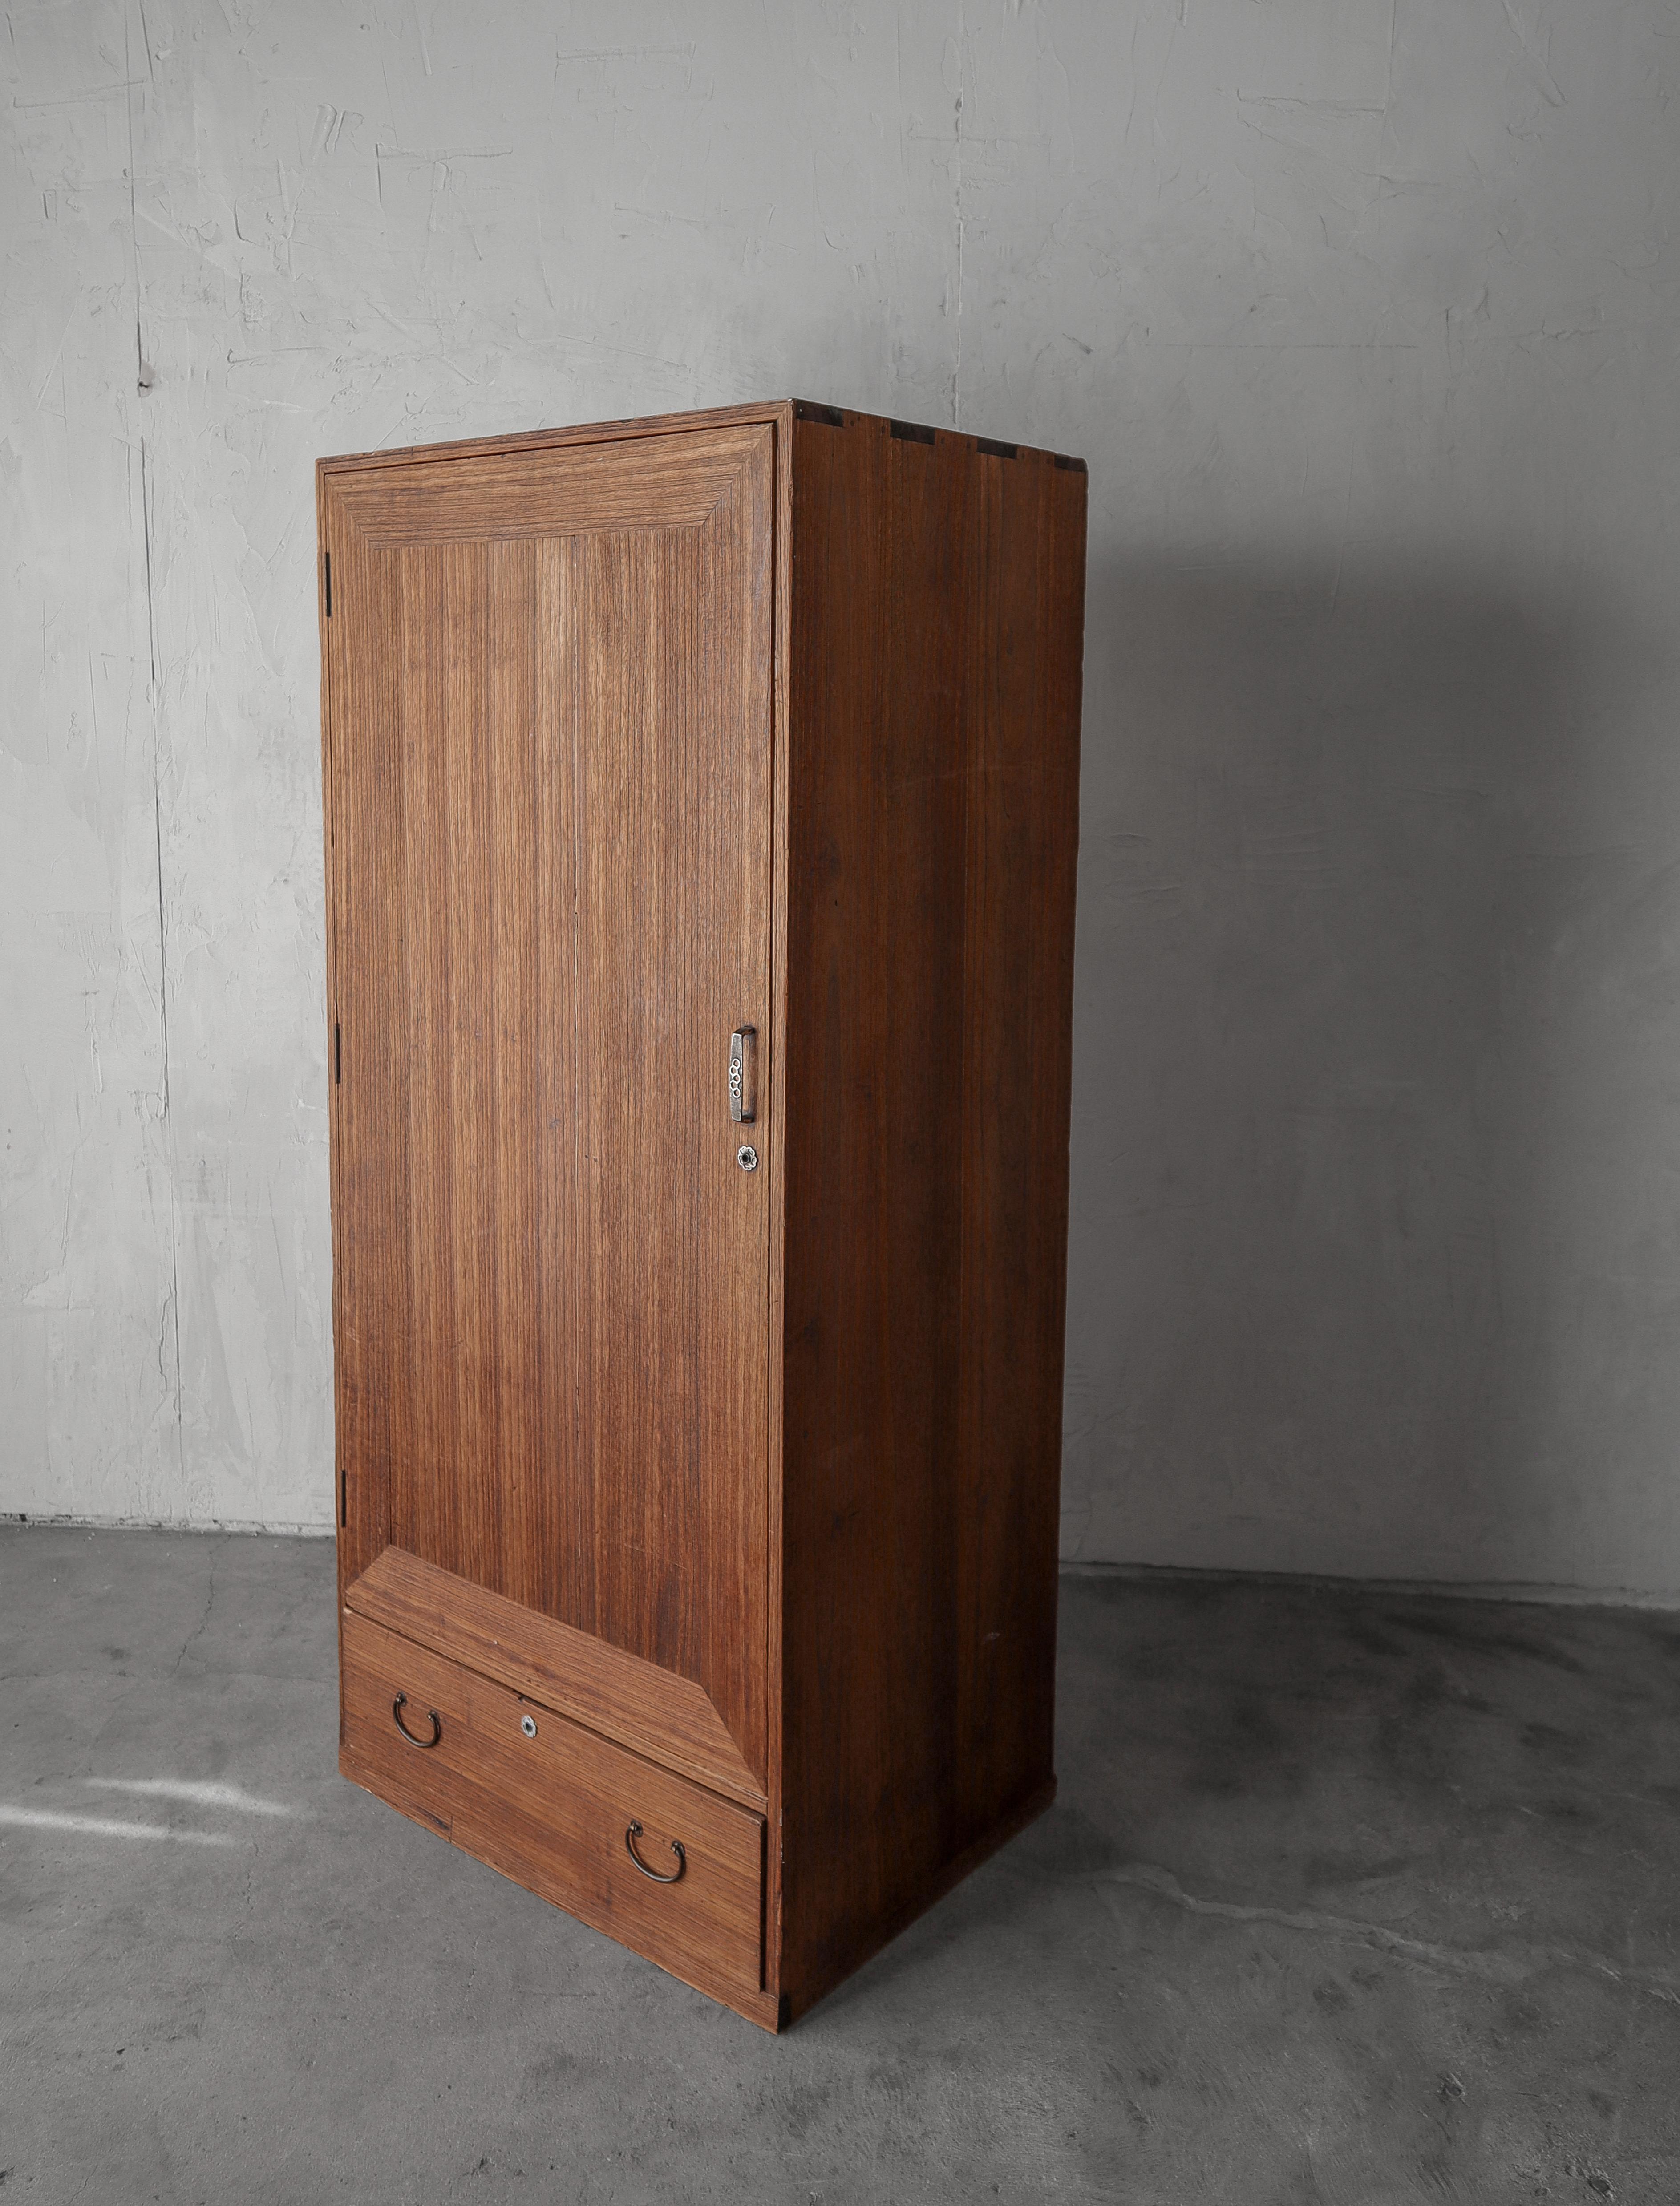 A beautiful example of an antique Japanese kimono cabinet.  This piece is beautiful with countless decades of character from age and use.  Crafted of teak wood with the most unique infinite rectangle pattern on the doors combined with the detailed